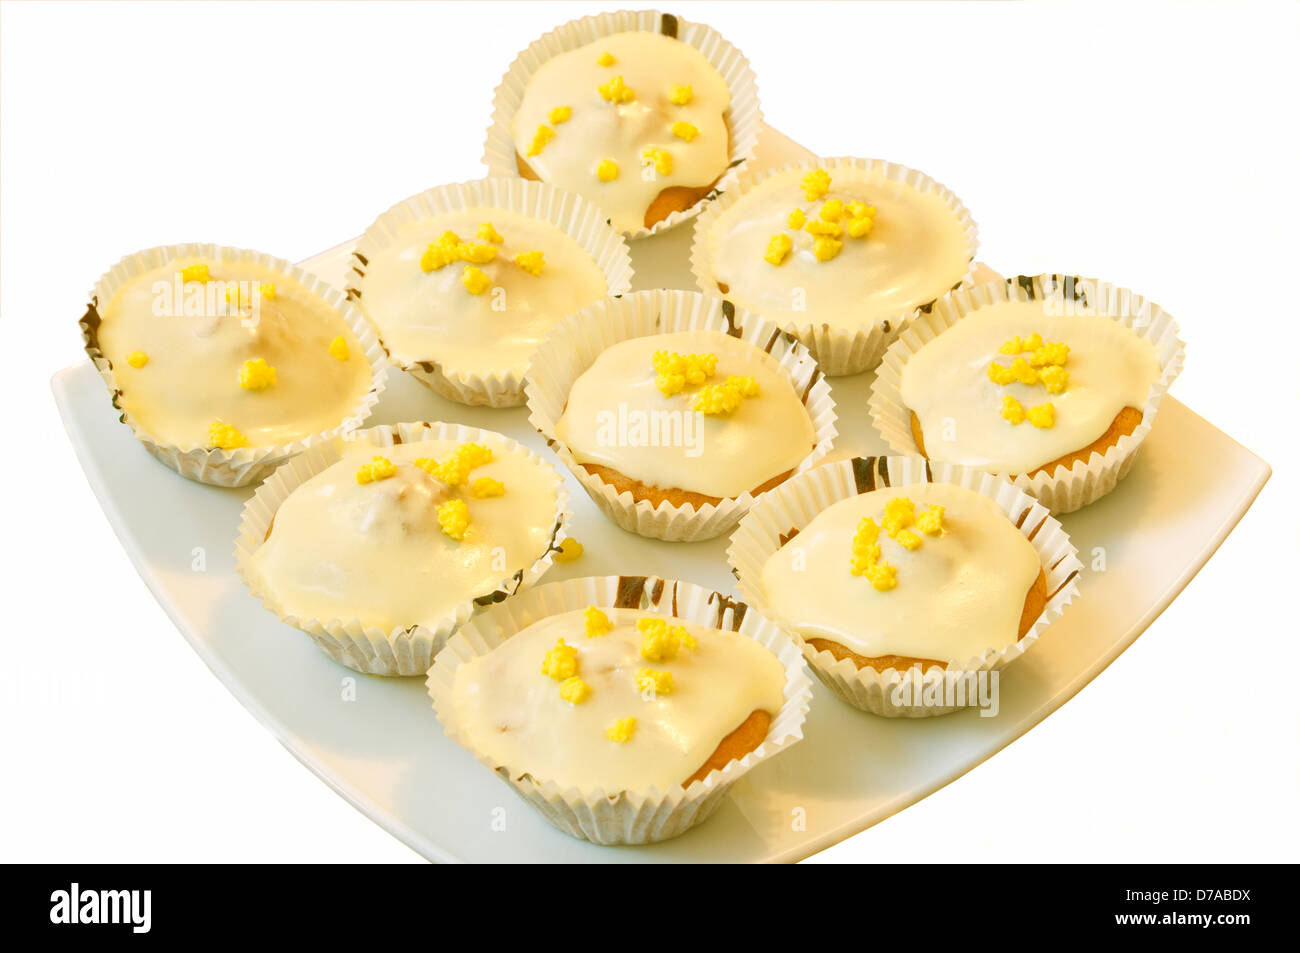 Plate Of Fairy Cakes Cup Cakes Cupcakes Stock Photo